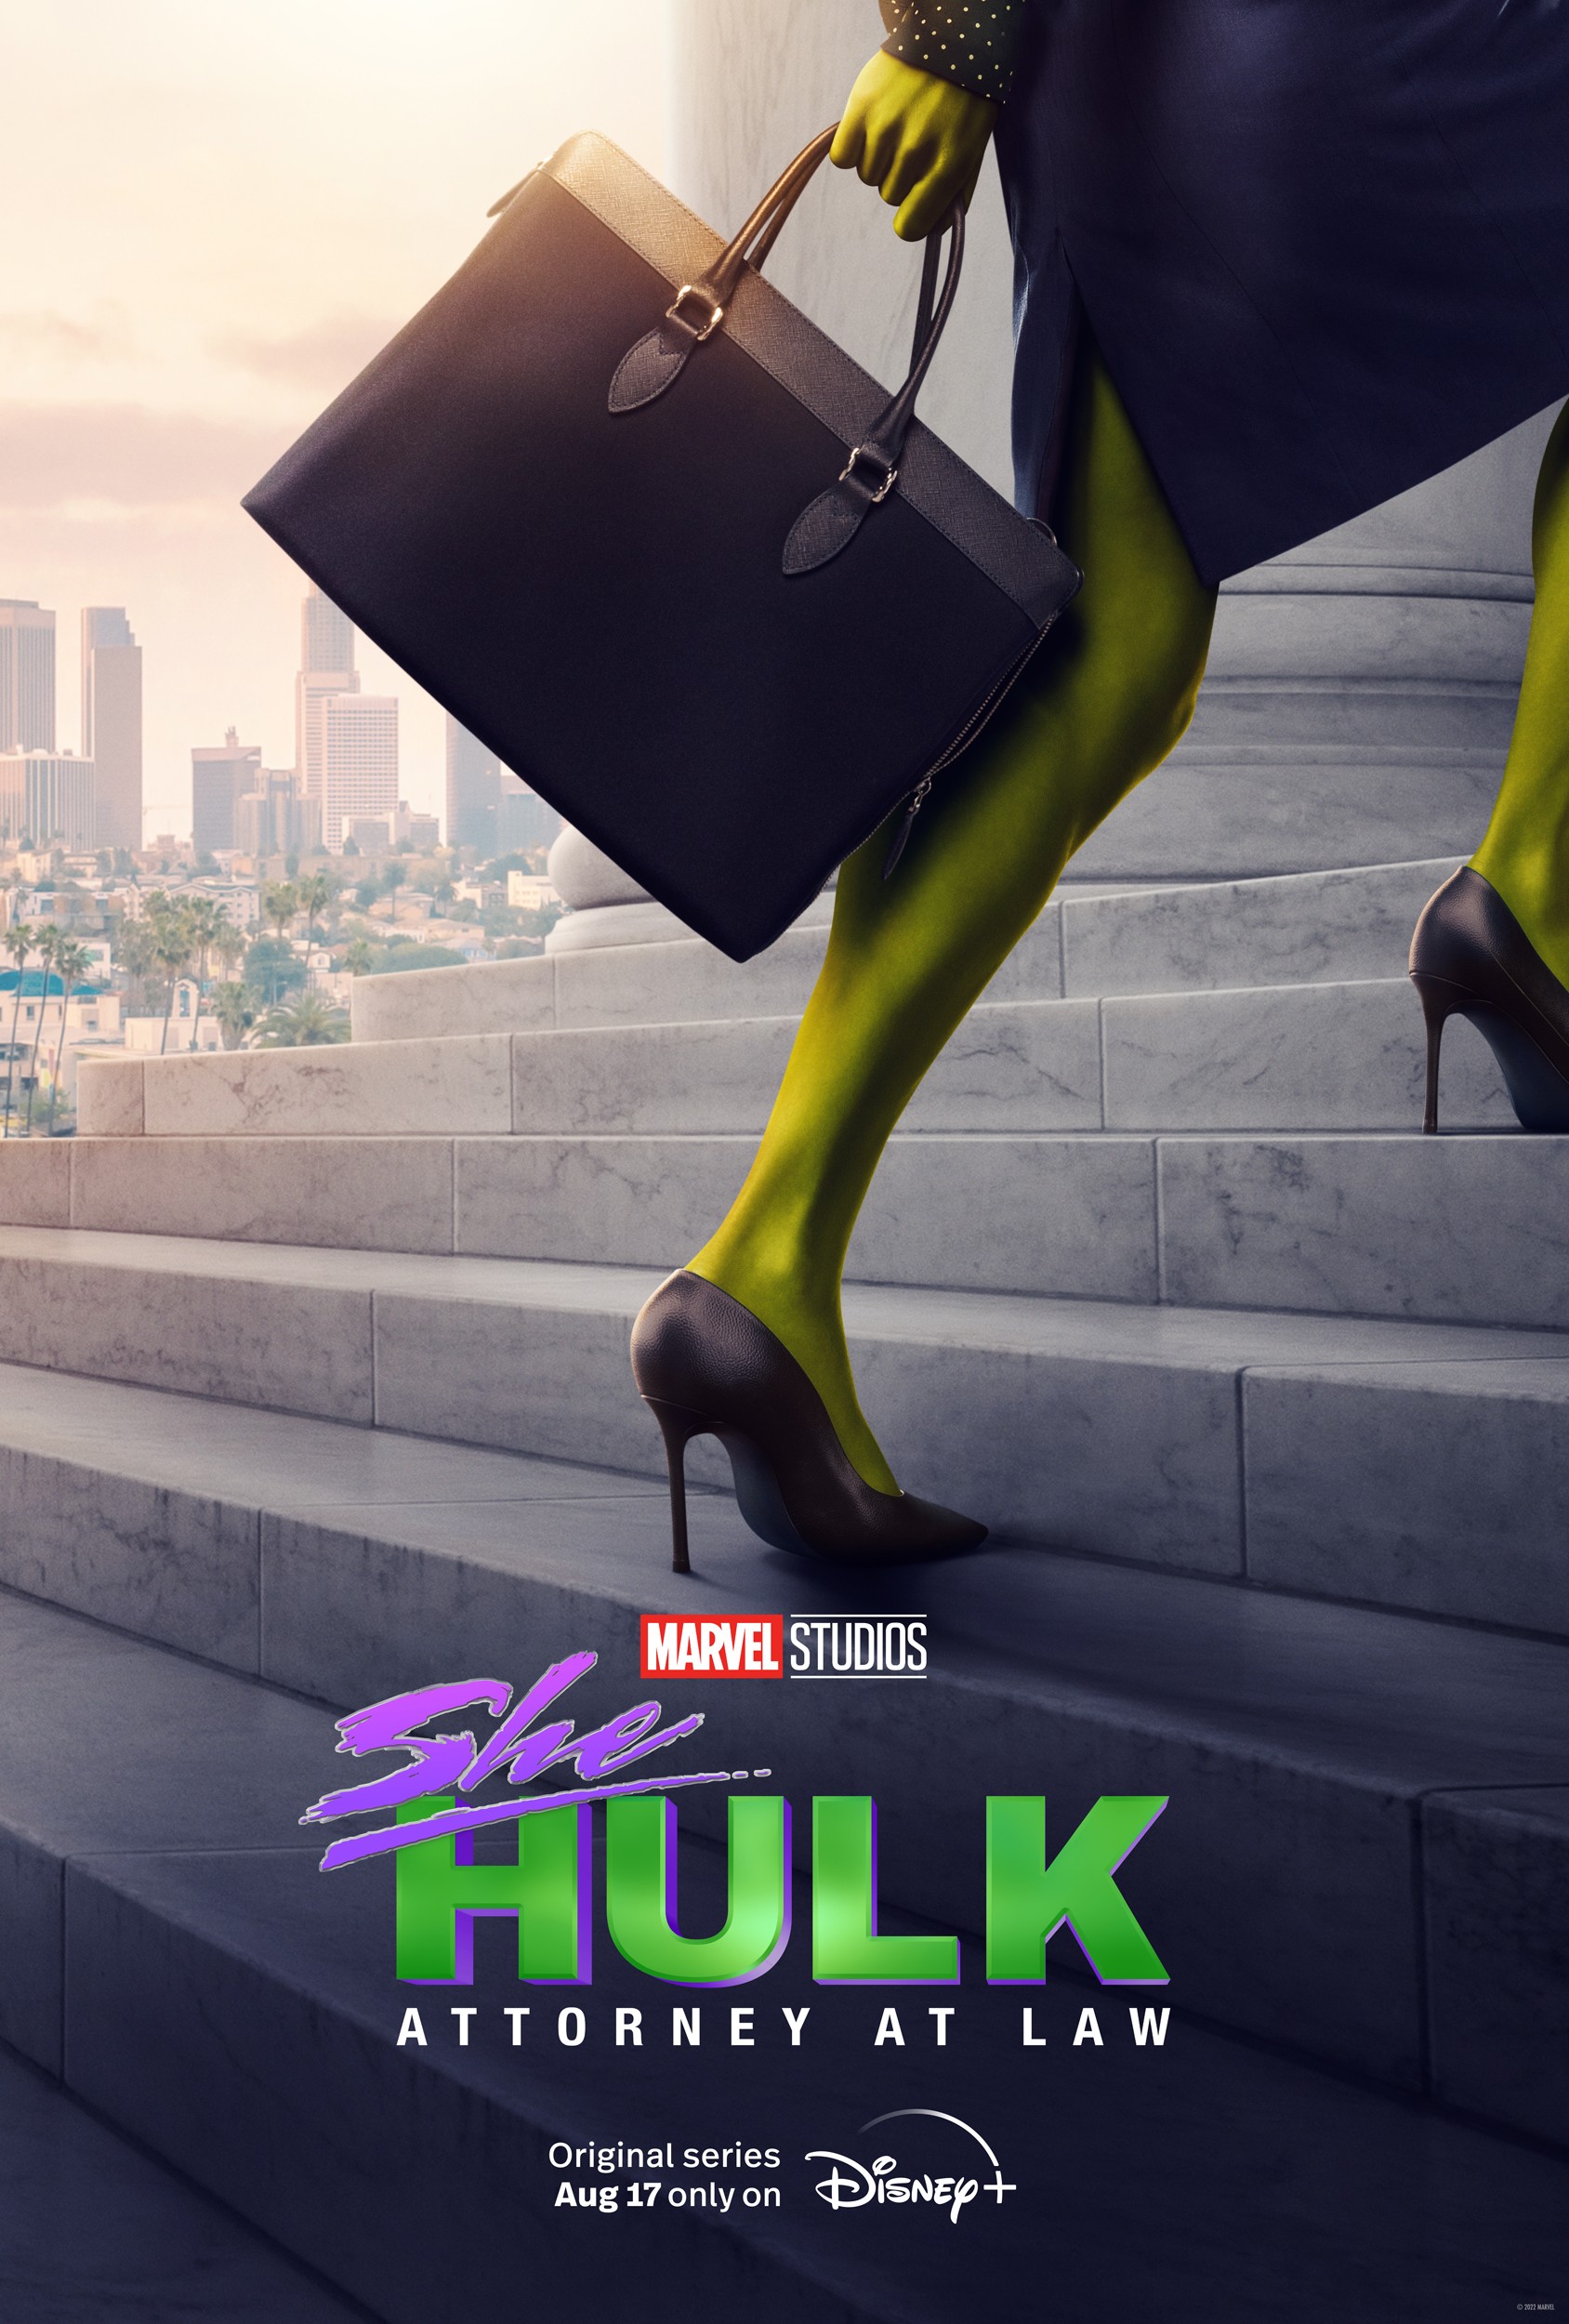 She-Hulk: Attorney at Law - Rotten Tomatoes